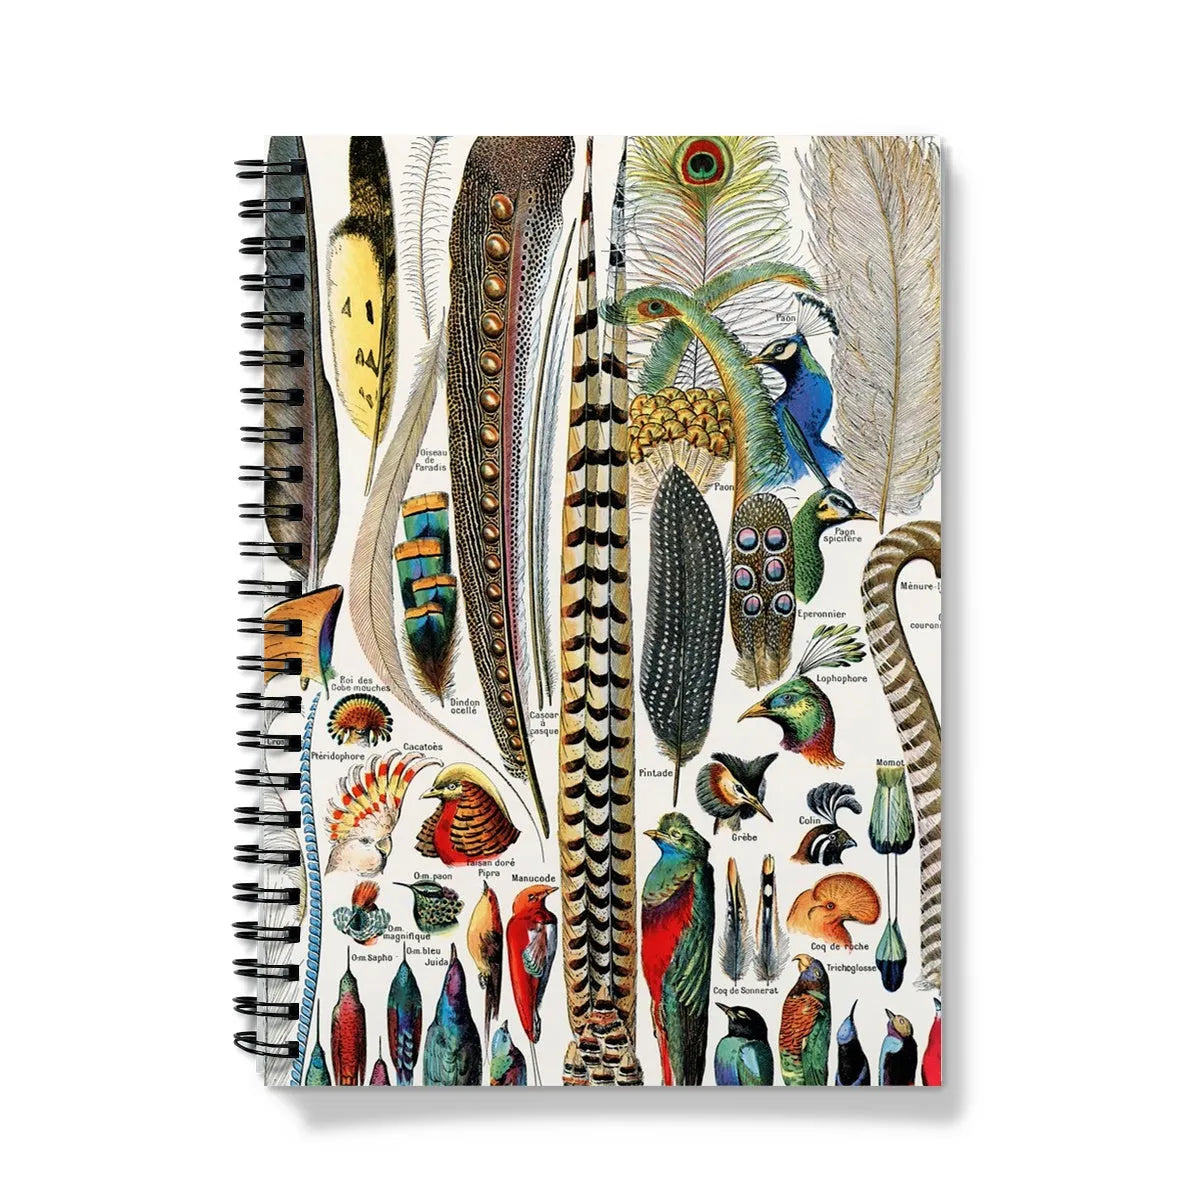 Plumes - Feathers By Adolphe Millot Notebook - A5 / Graph - Notebooks & Notepads - Aesthetic Art